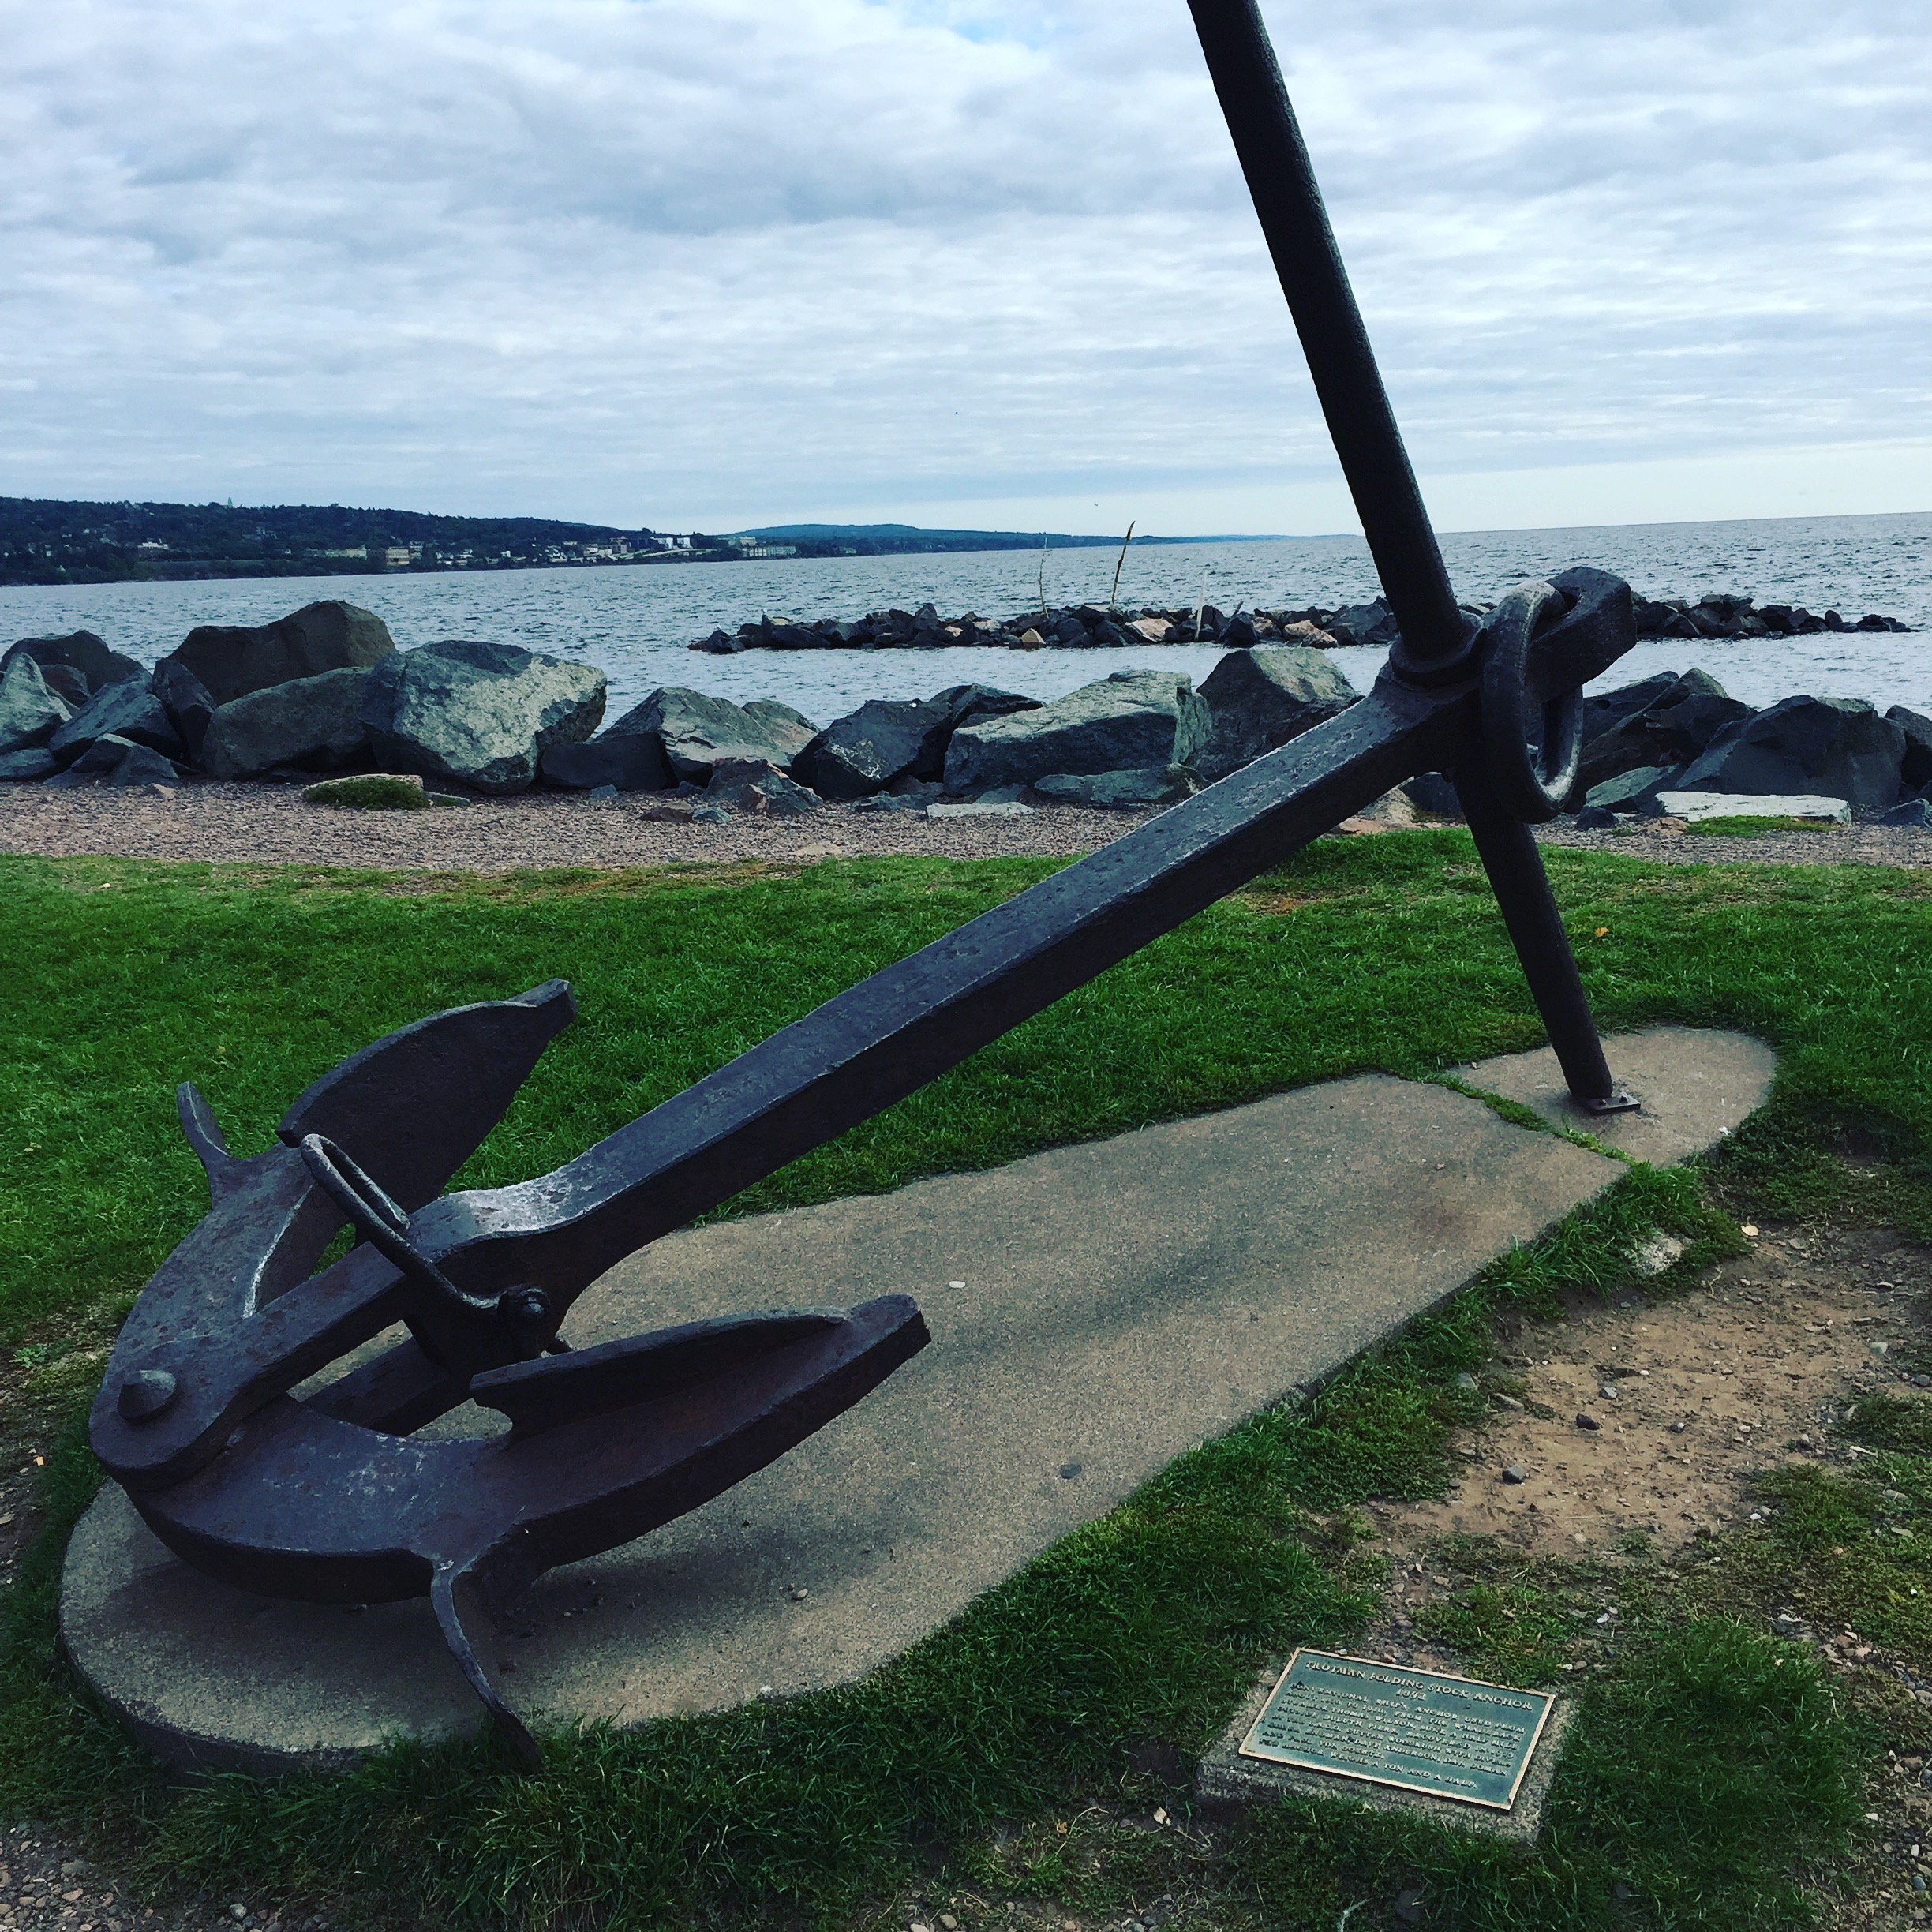 a large anchor on a concrete platform on grass by a body of water